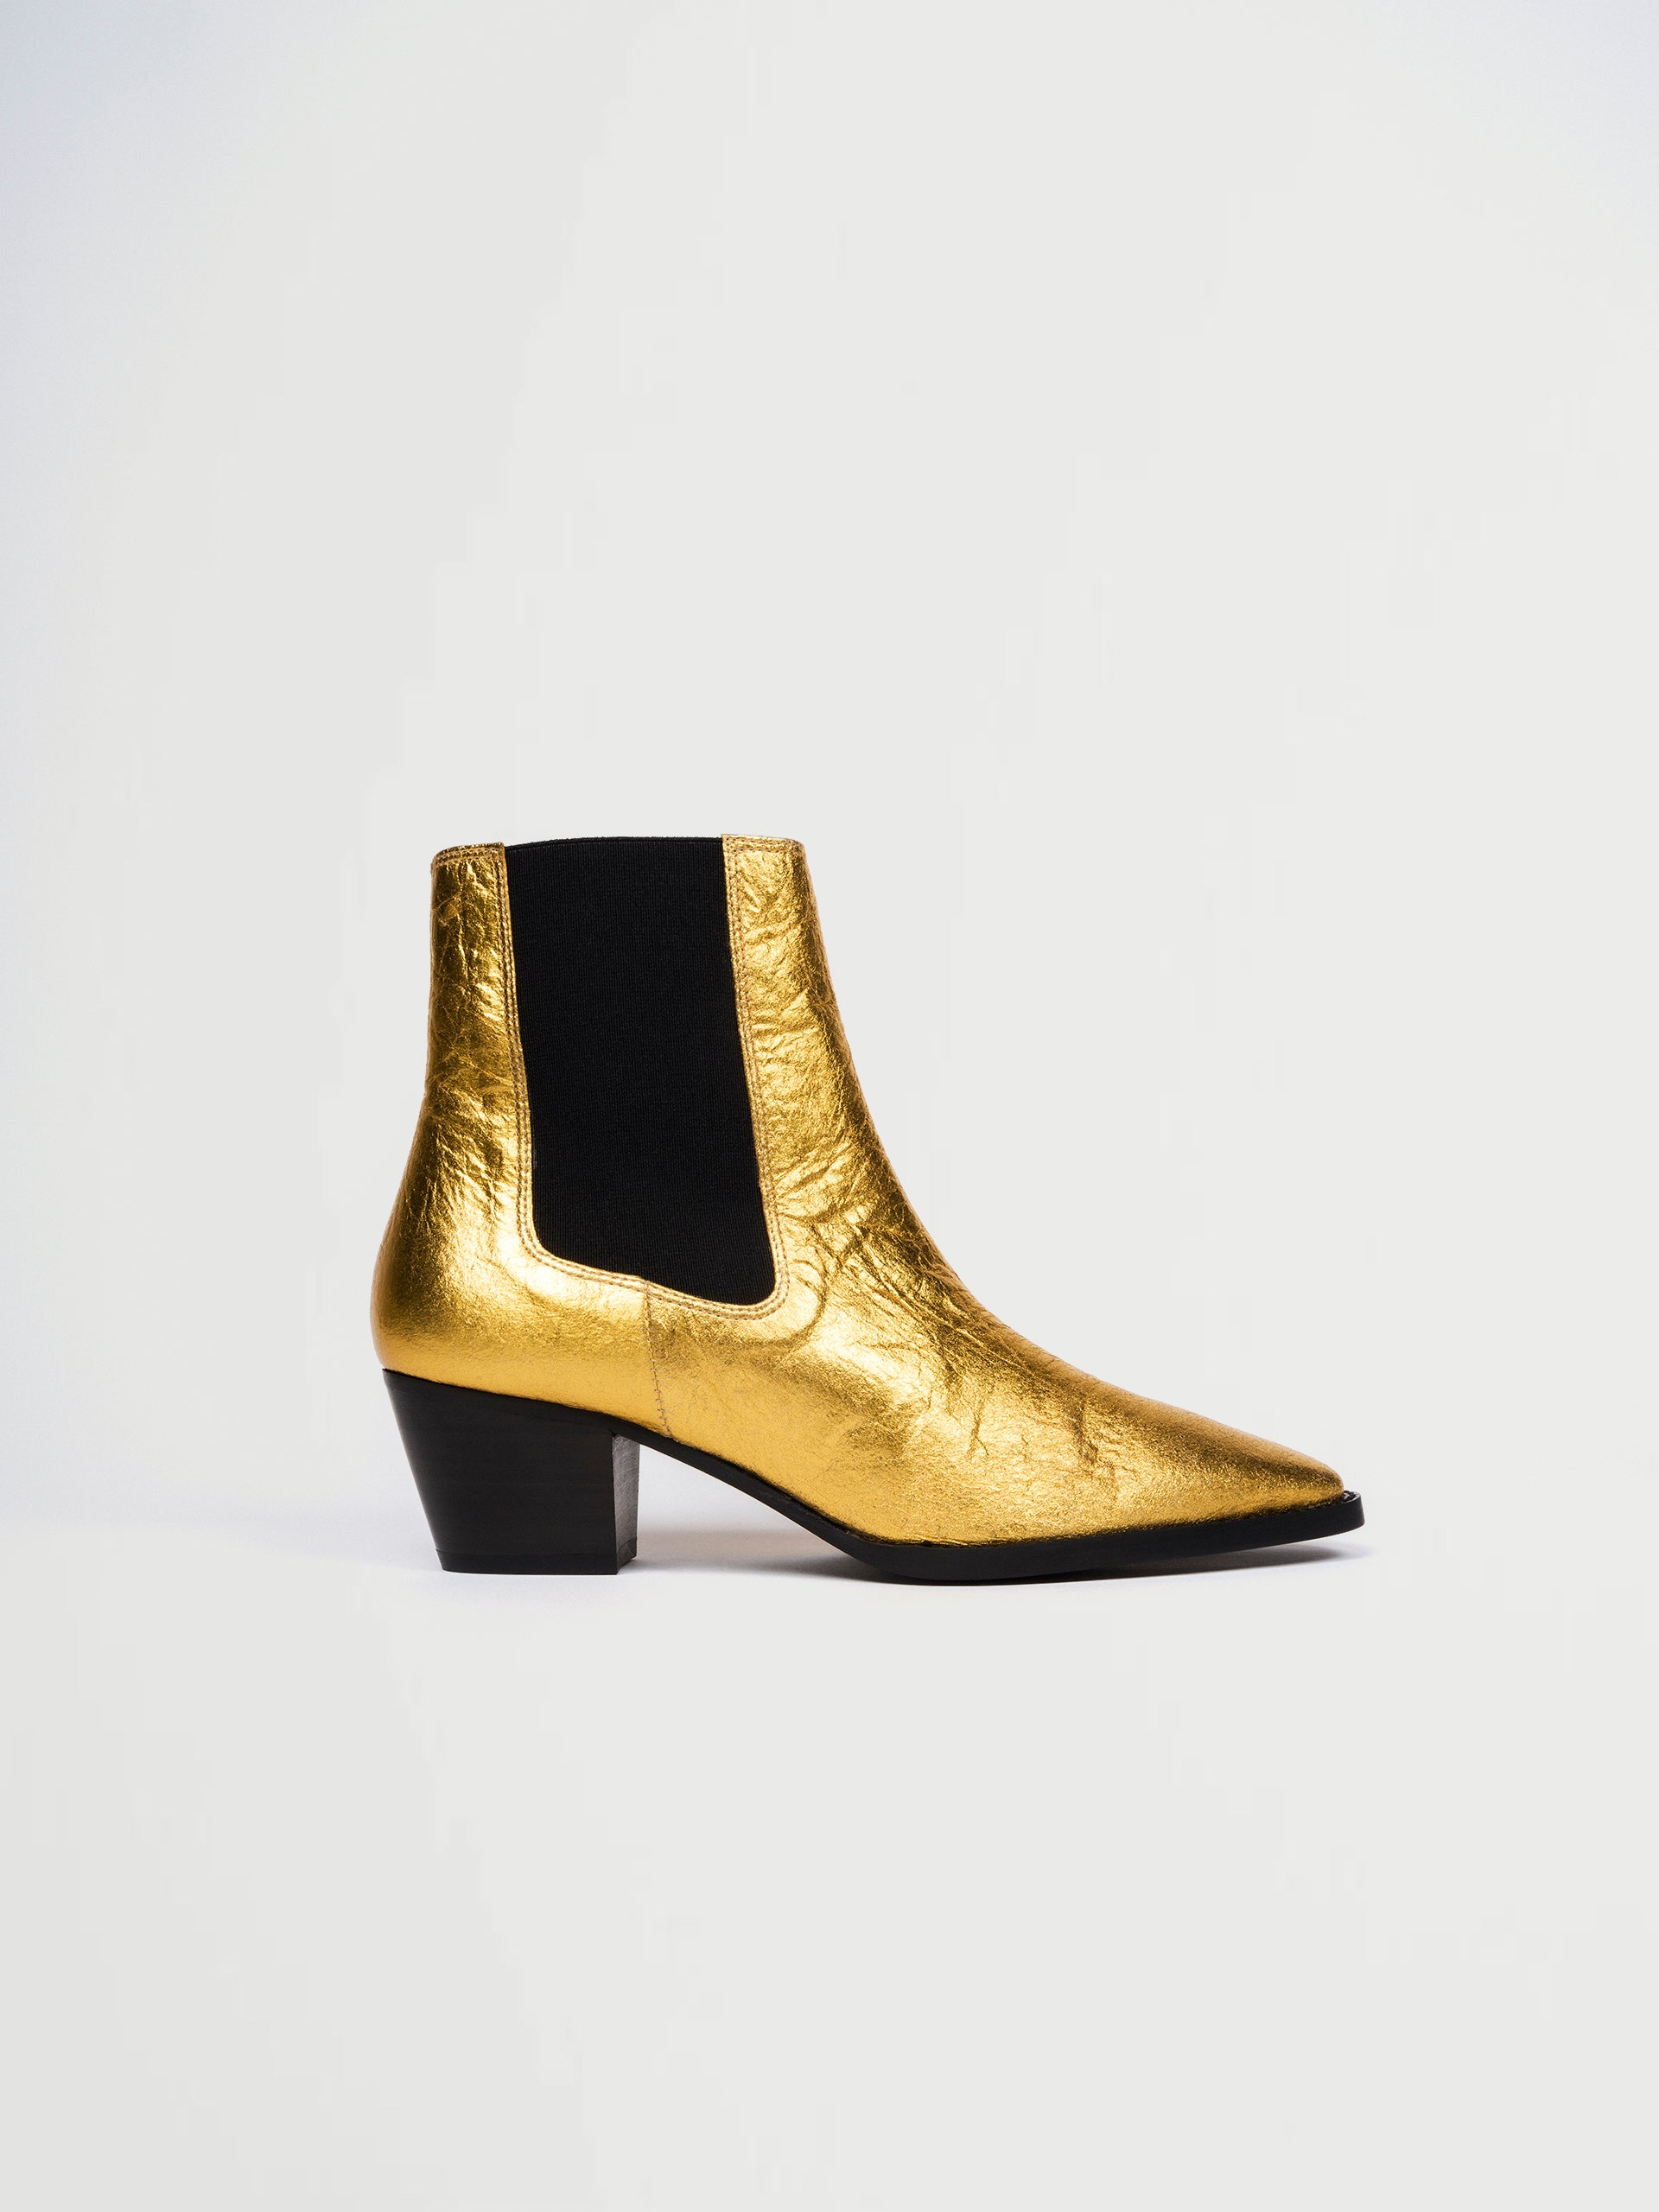 Gold vegan leather boots